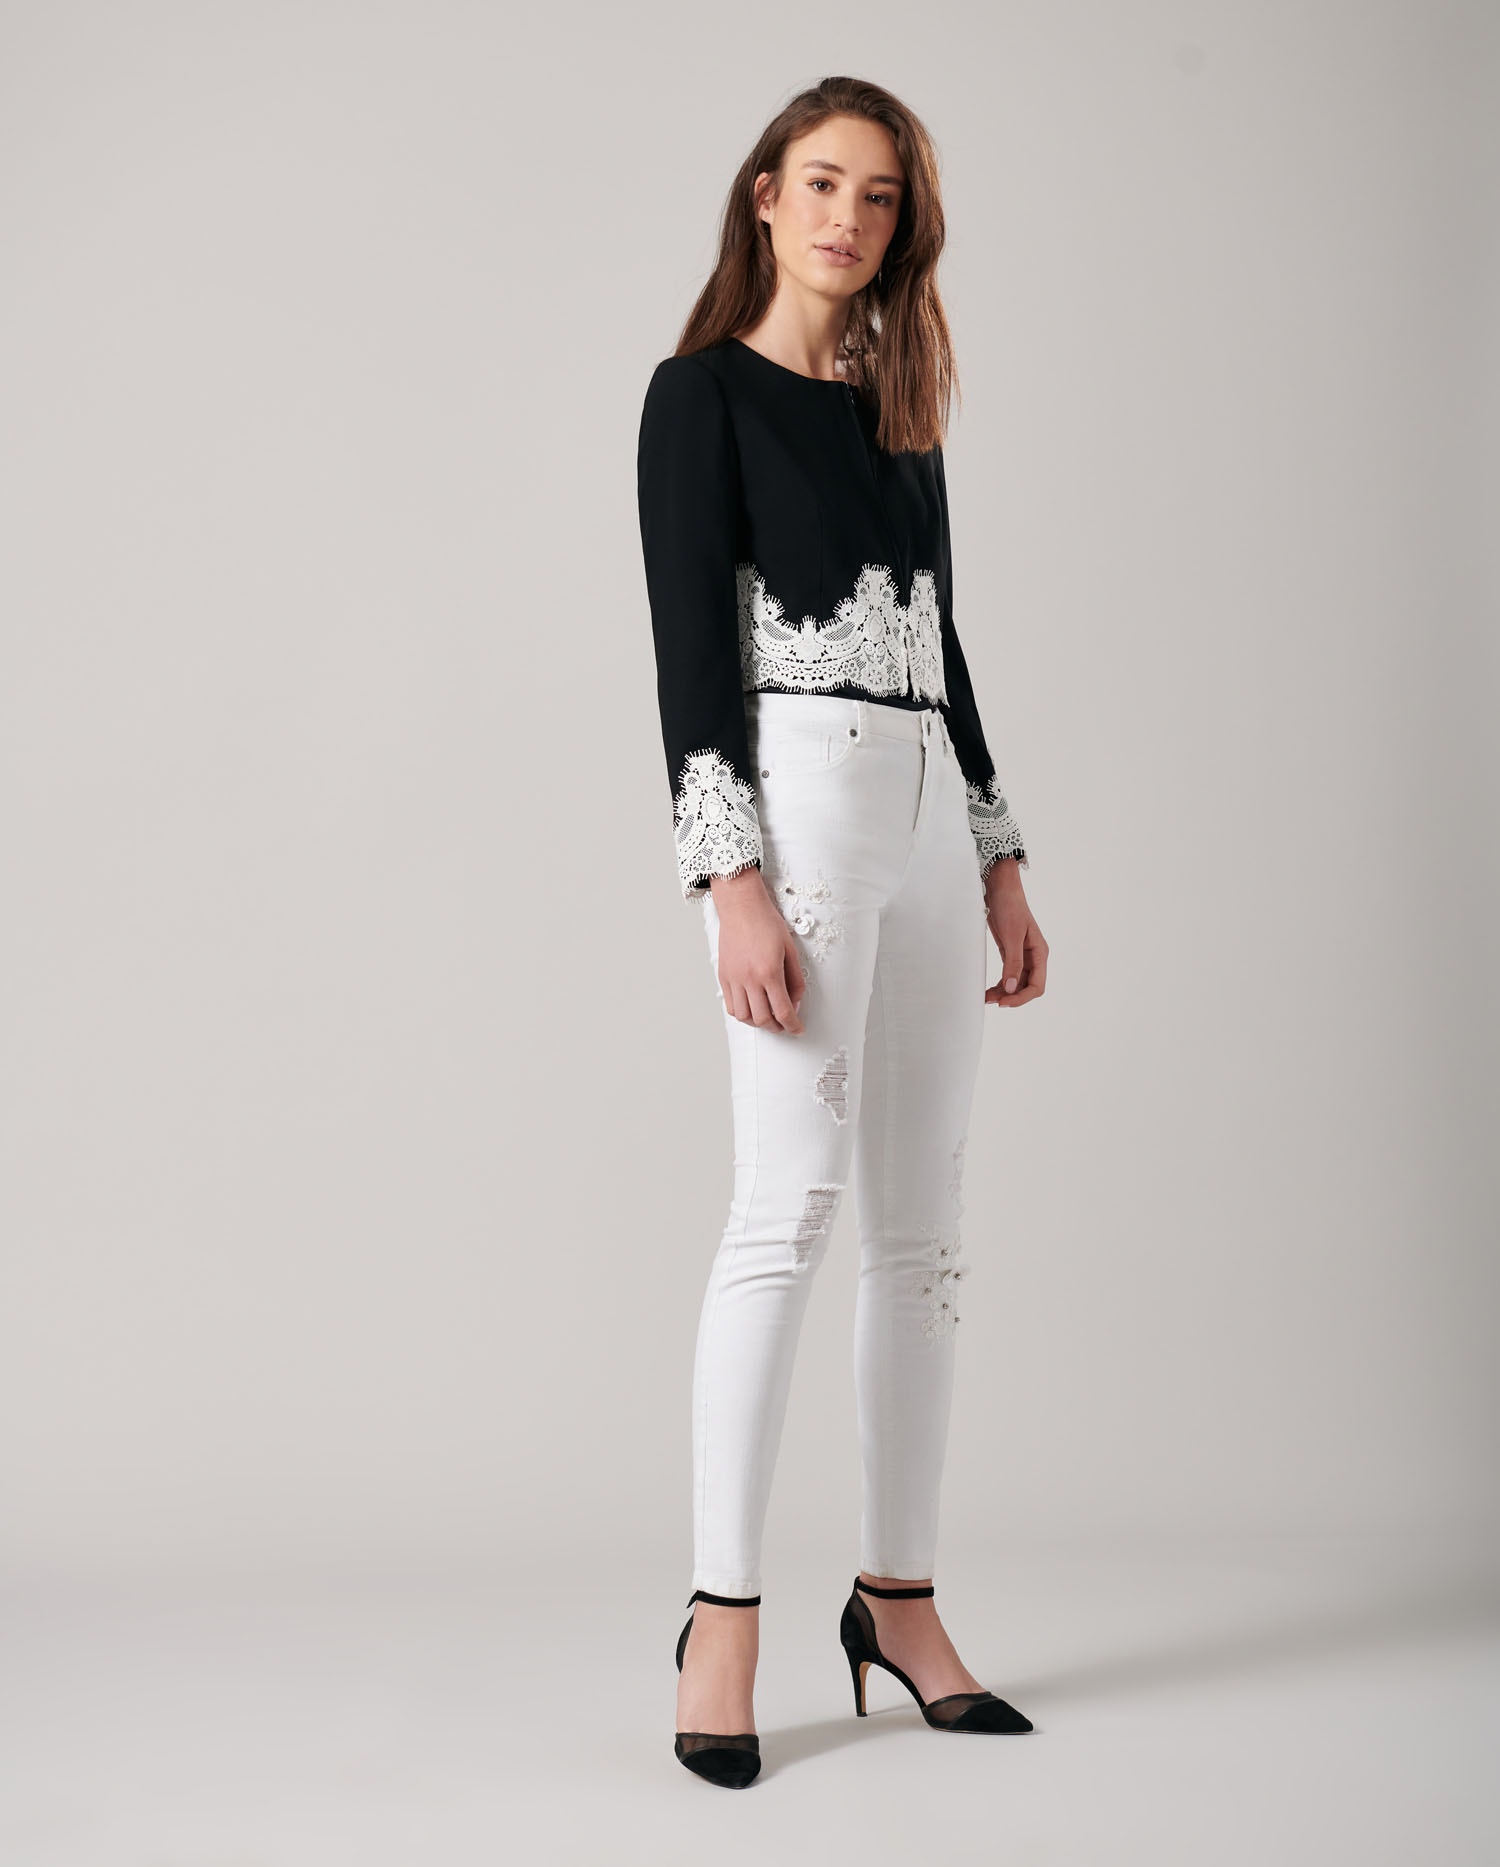 Discover The VALA White stretch denim jeans with embroidered and jeweled flowers from ANNE FONTAINE